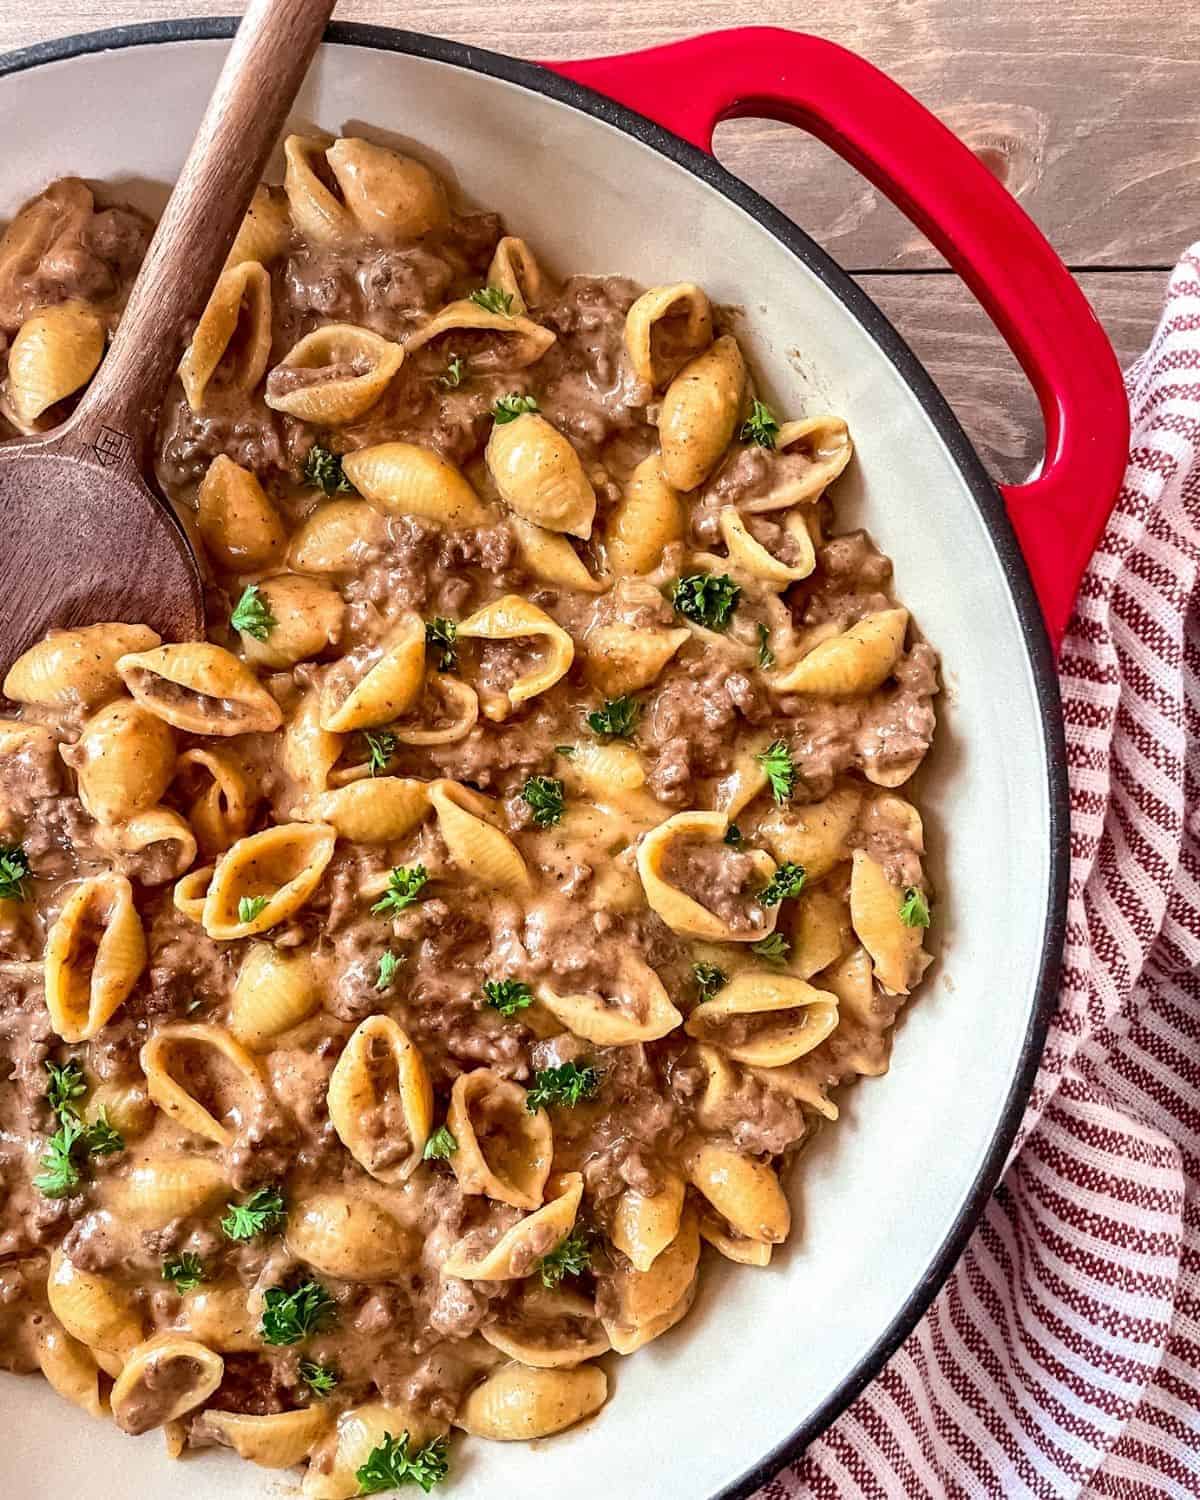 Ground beef and pasta shells in a brown creamy sauce.